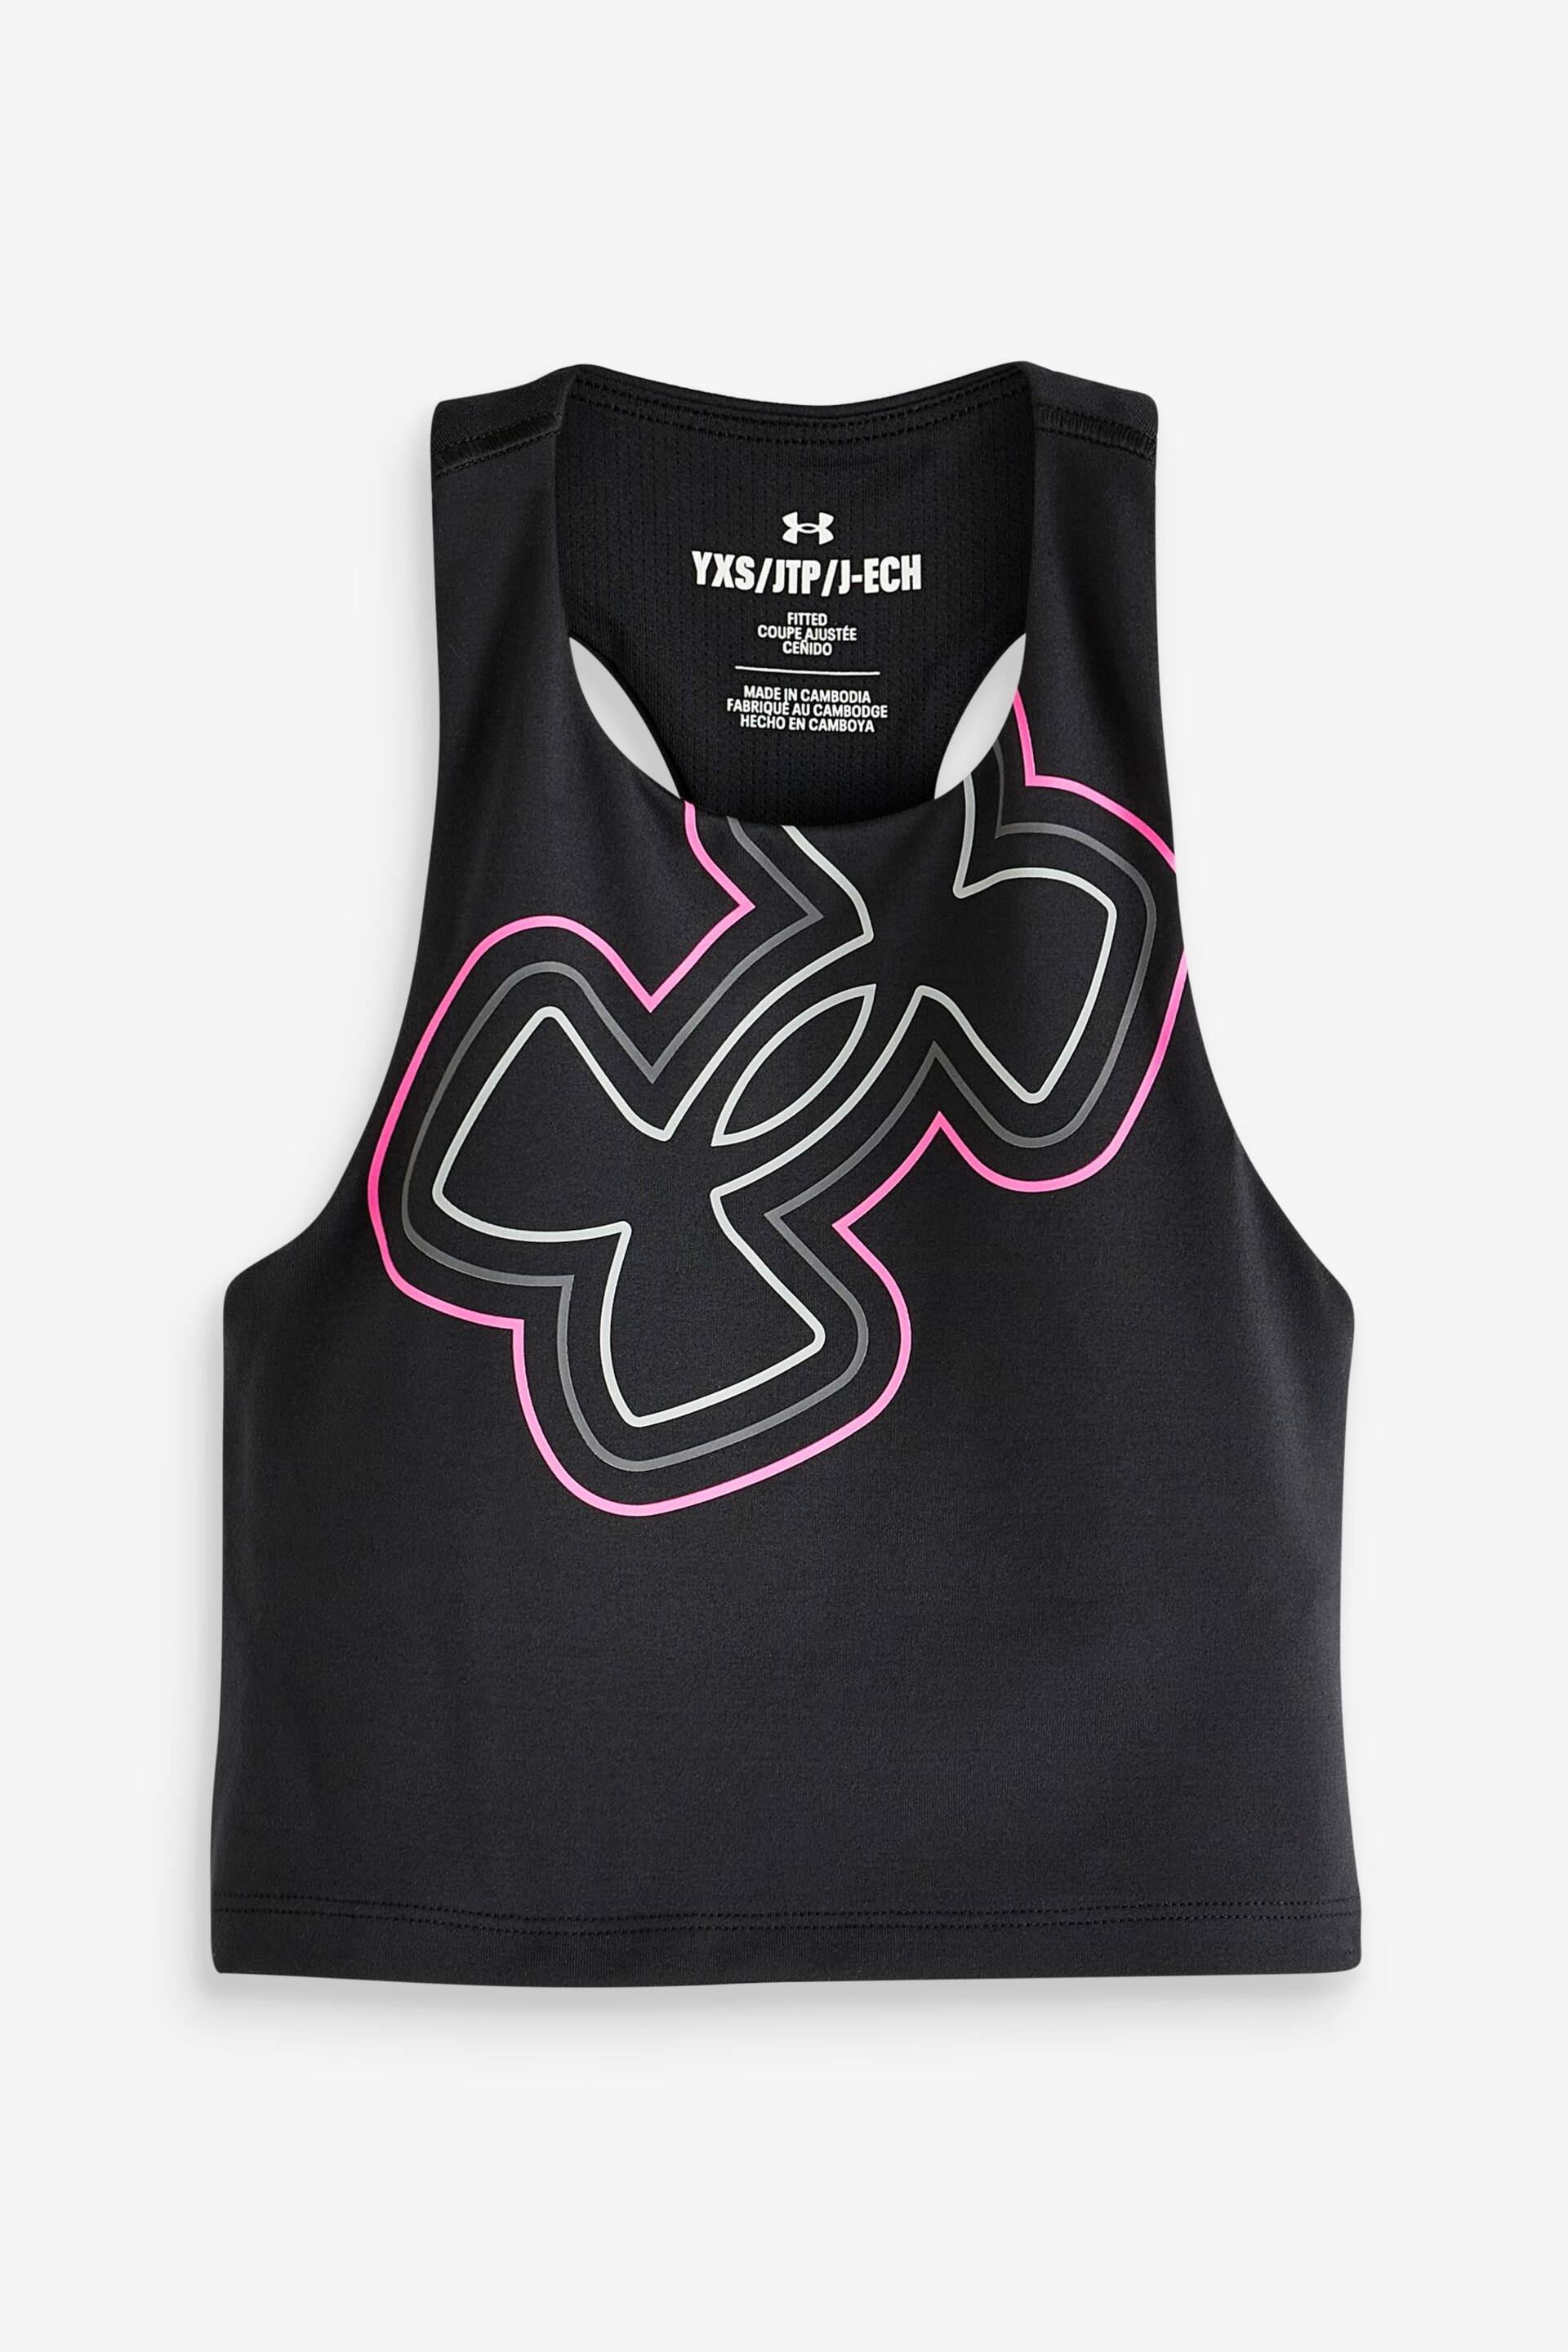 Under Armour Black Motion Tank Top - Image 1 of 2